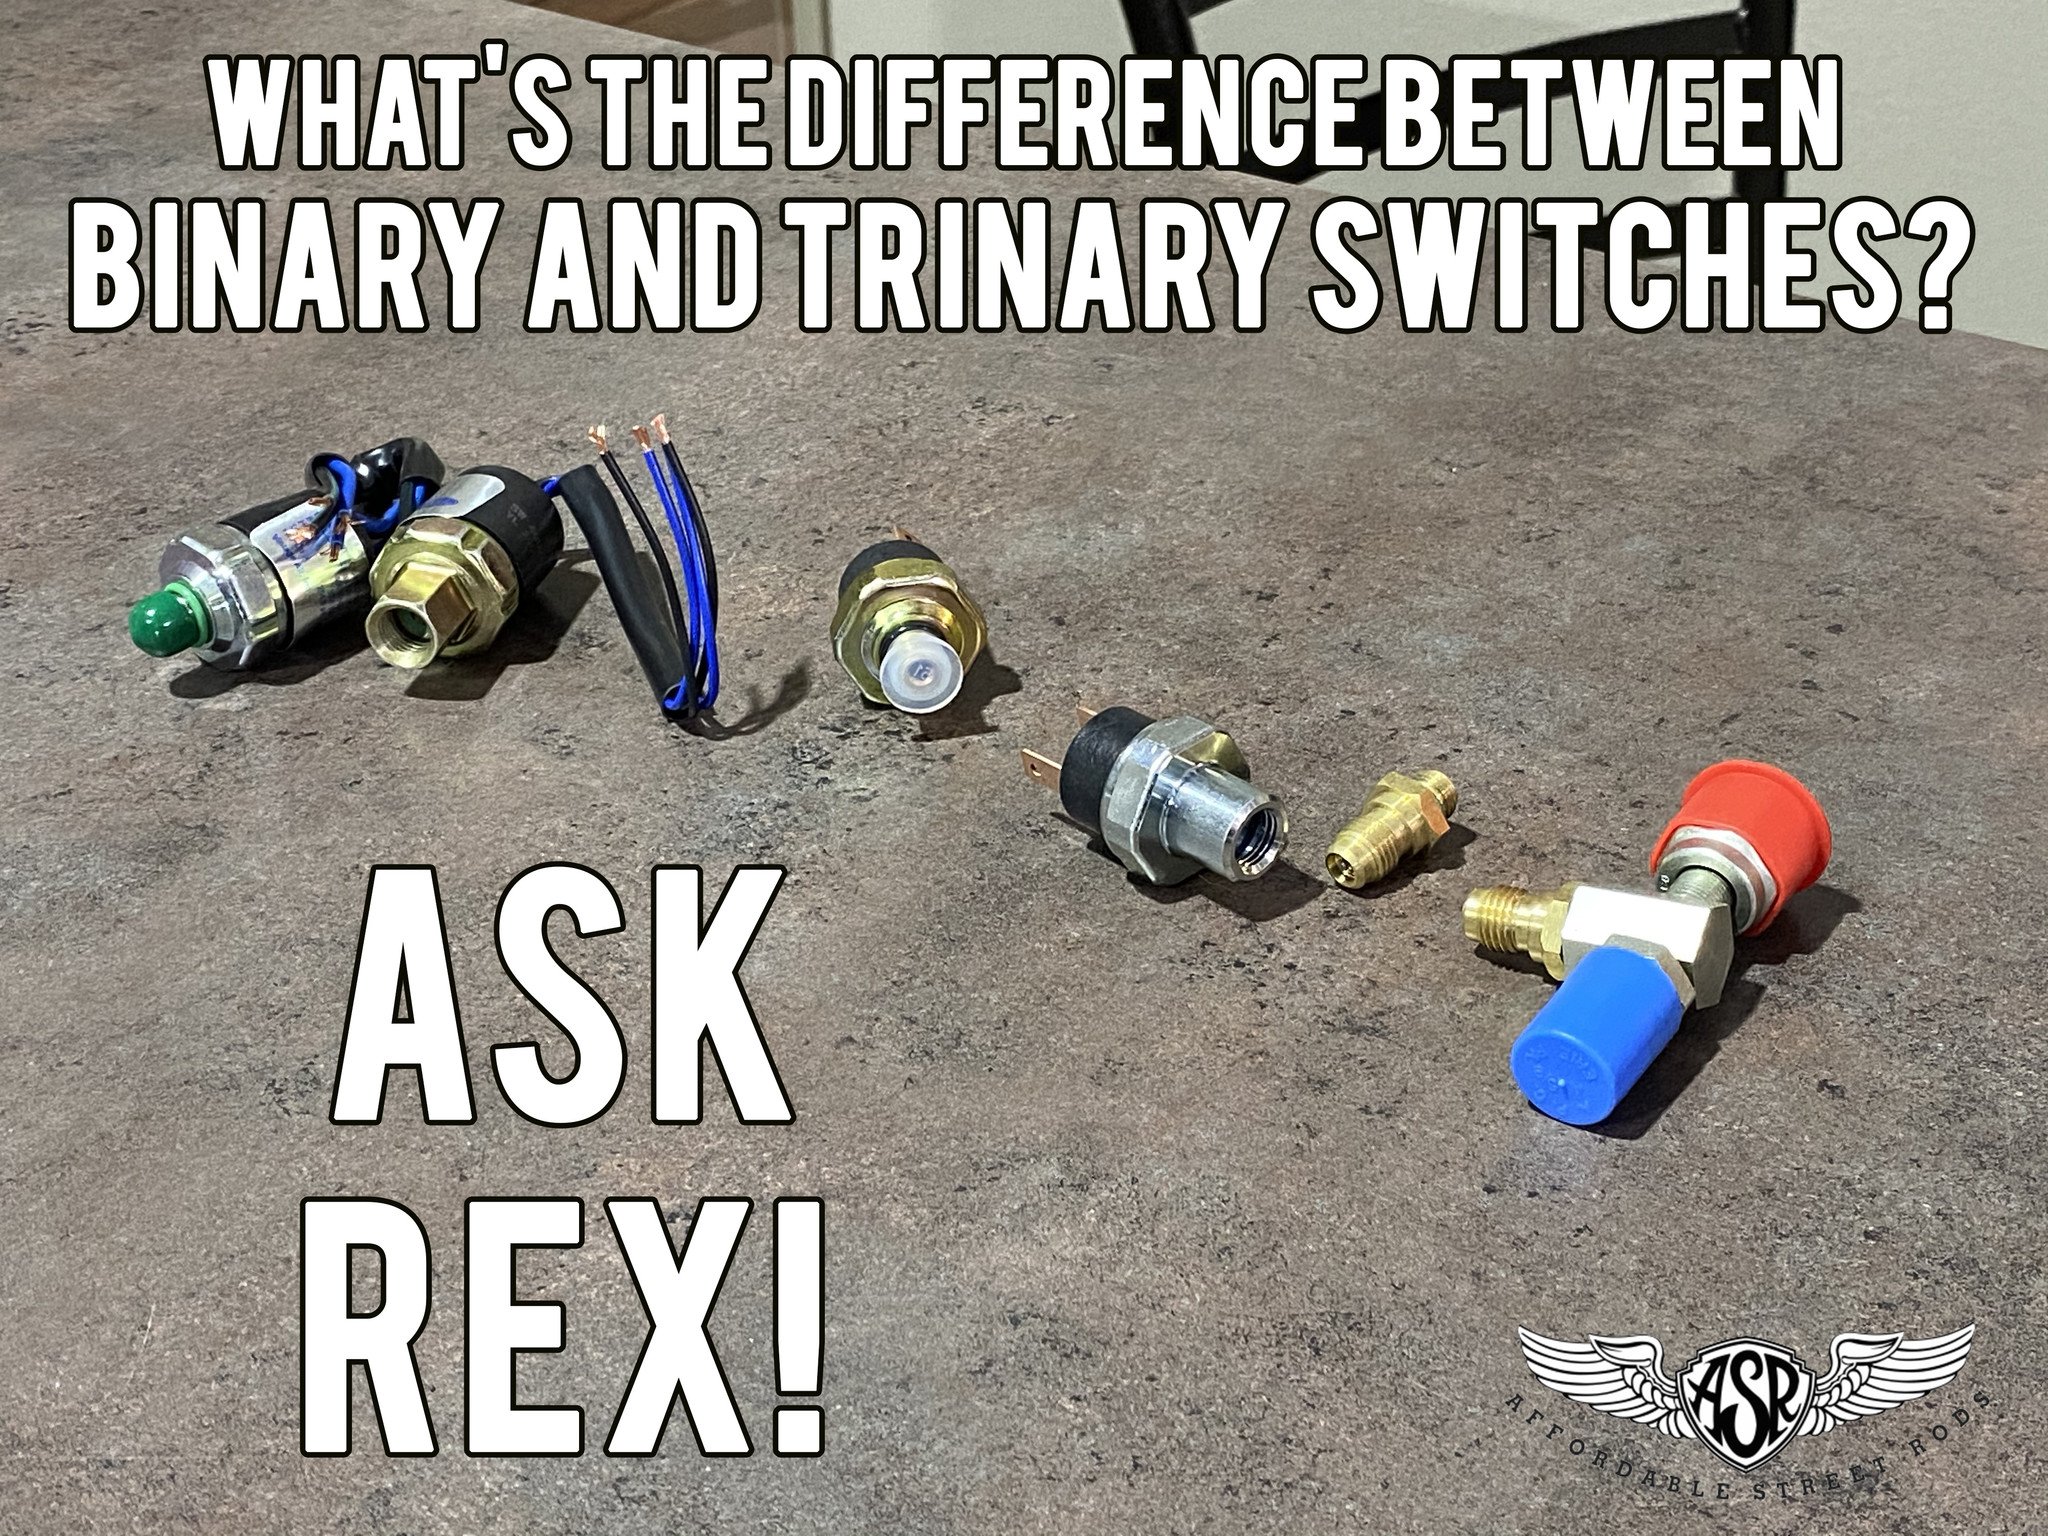 What's the difference between a binary and a trinary switch?